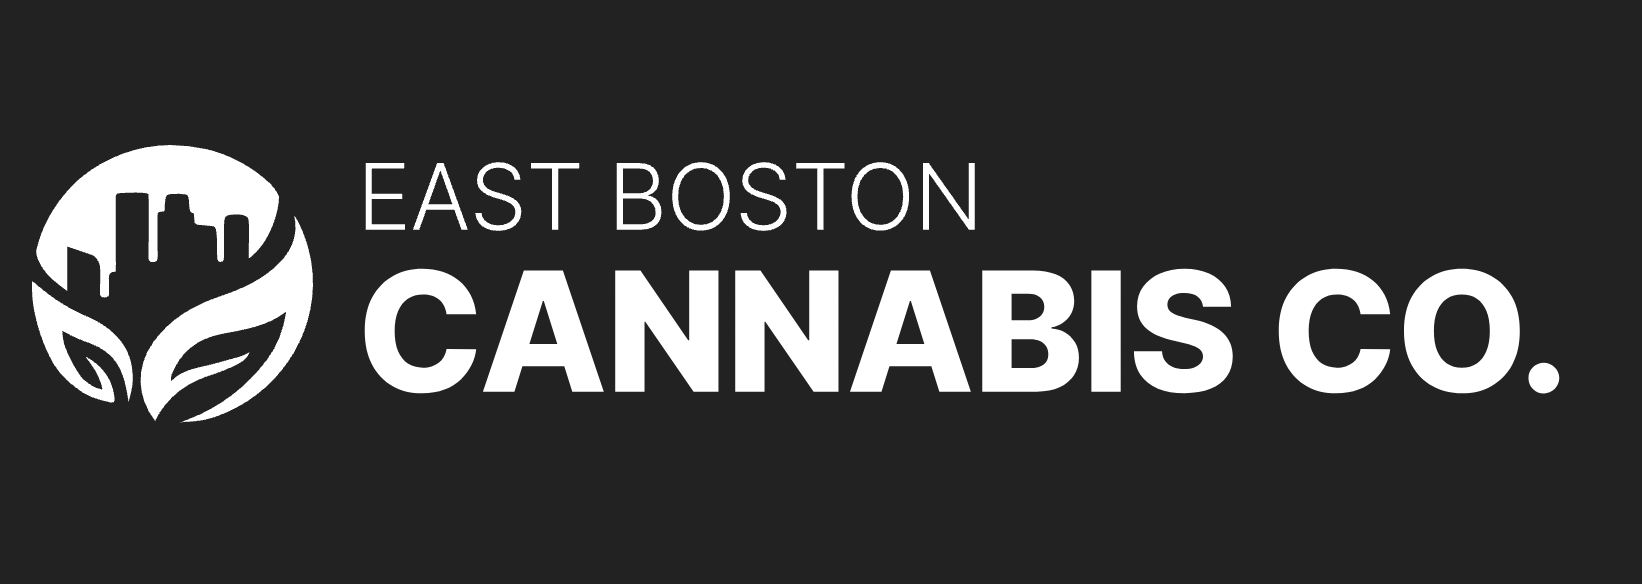 East Boston Cannabis.png